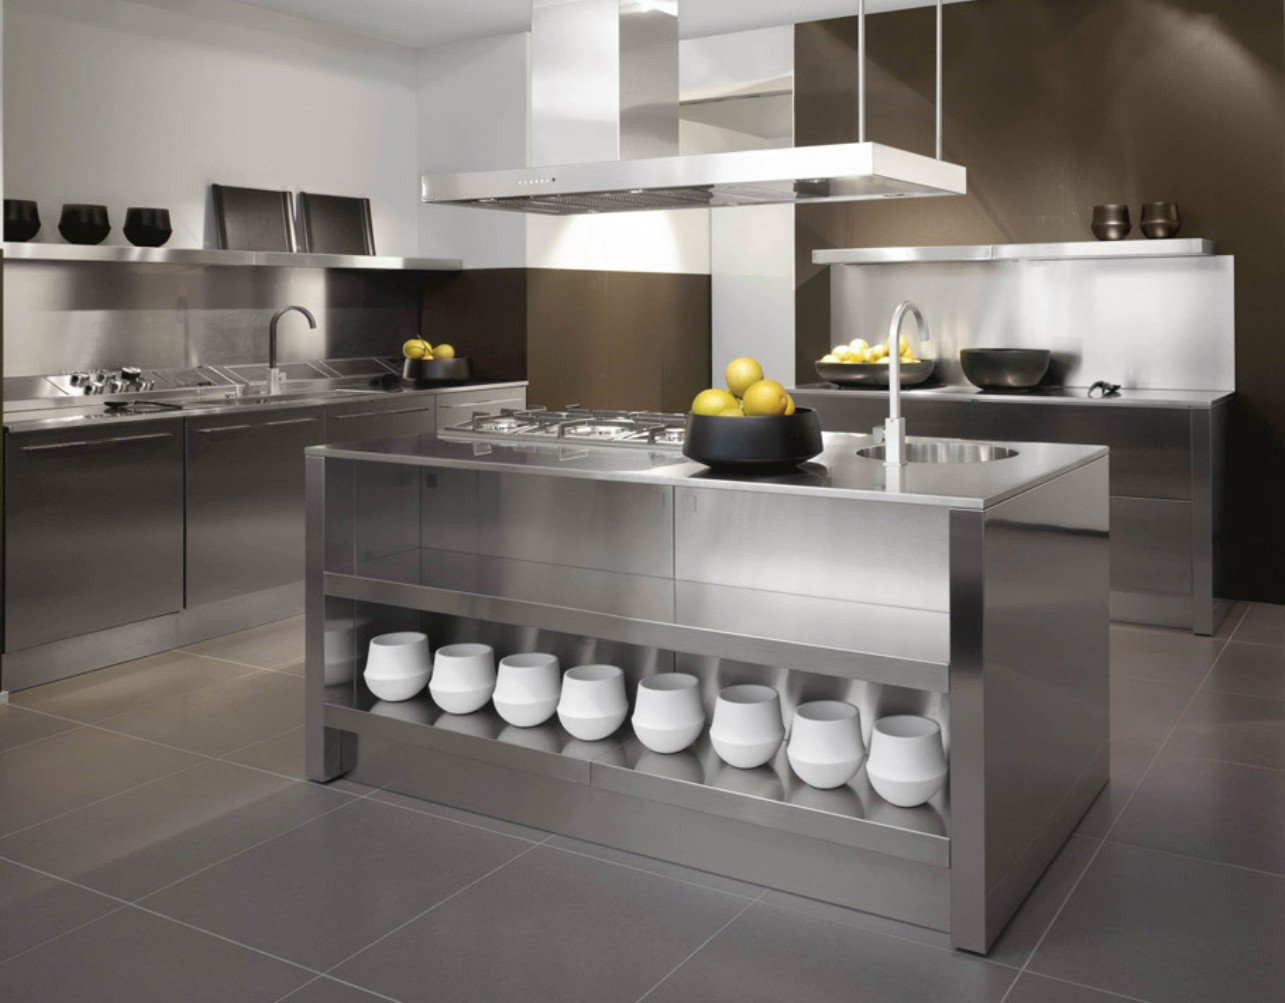 tainless-steel-kitchen-island-along-with-retro-steel-kitchen-cabinet-and-stainless-steel-kitchen-counter-beautiful-kitchen-design-ideas-using-retro-steel-kit Kitchen Cabinets for your modern home